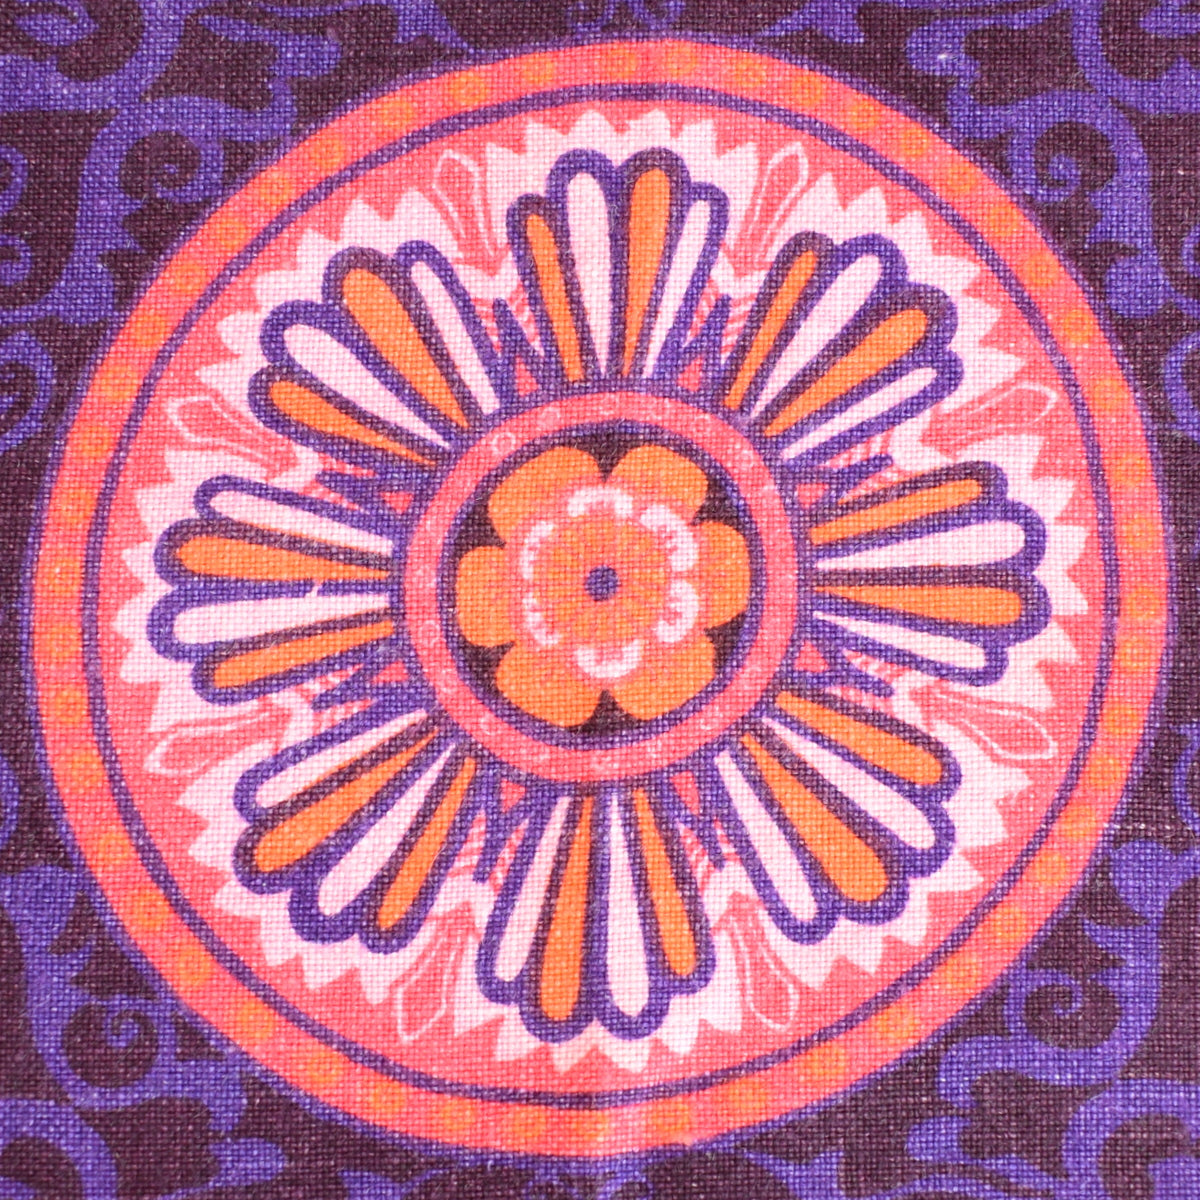 Vintage 1970s Fabric Placemat Pair - Flower Power - Pink